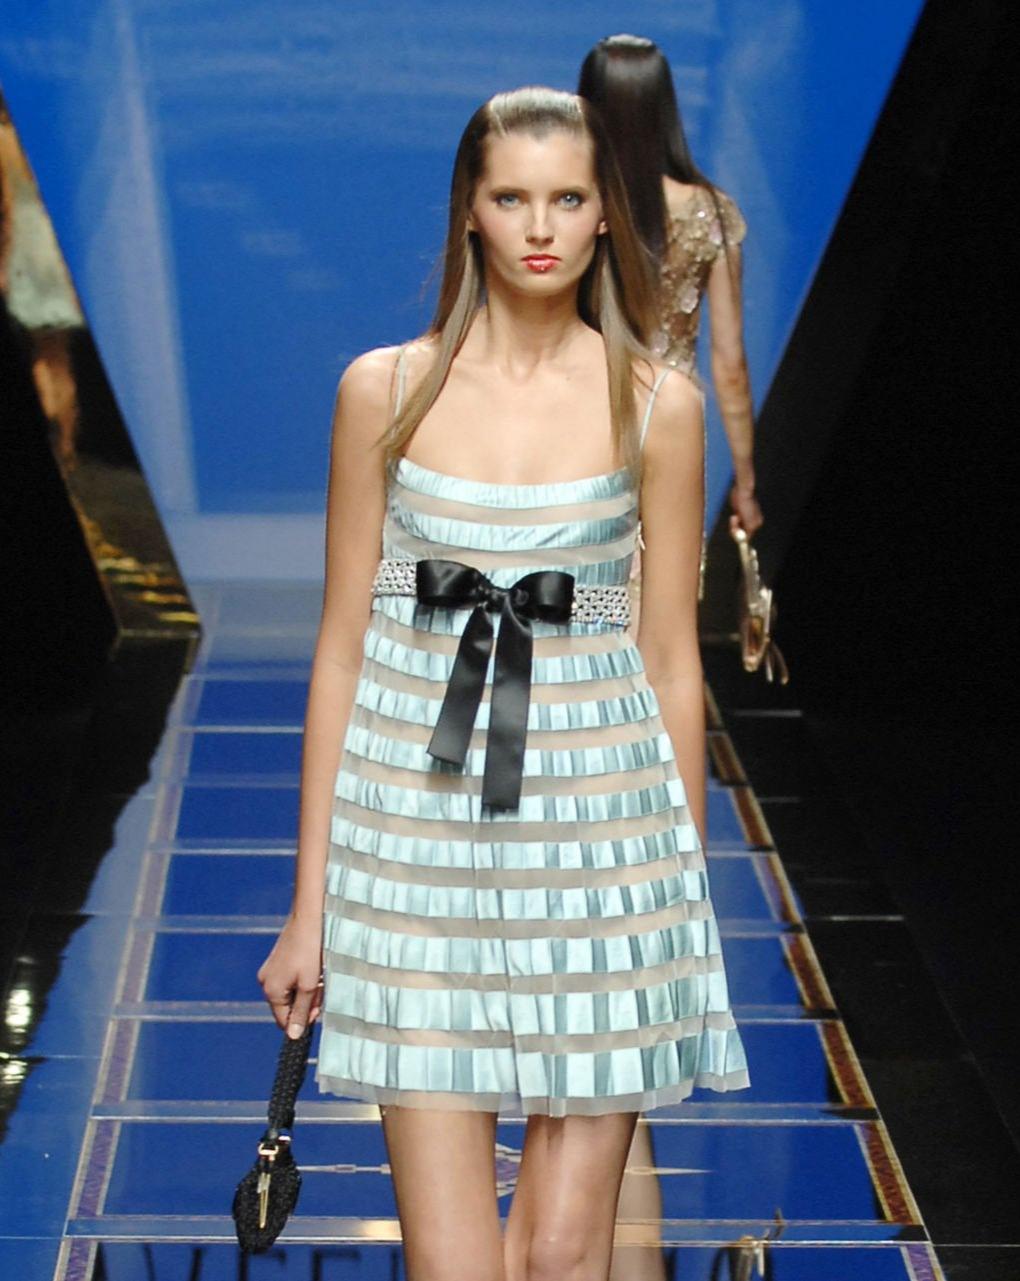 S/S 2007 Valentino sky blue pleated mini dress with black silk bow. Spaghetti strap sleeveless mini dress with crystal embellishments at waist and alternating pleating and mesh horizontal striped paneling. Concealed side zip closure, snap closures